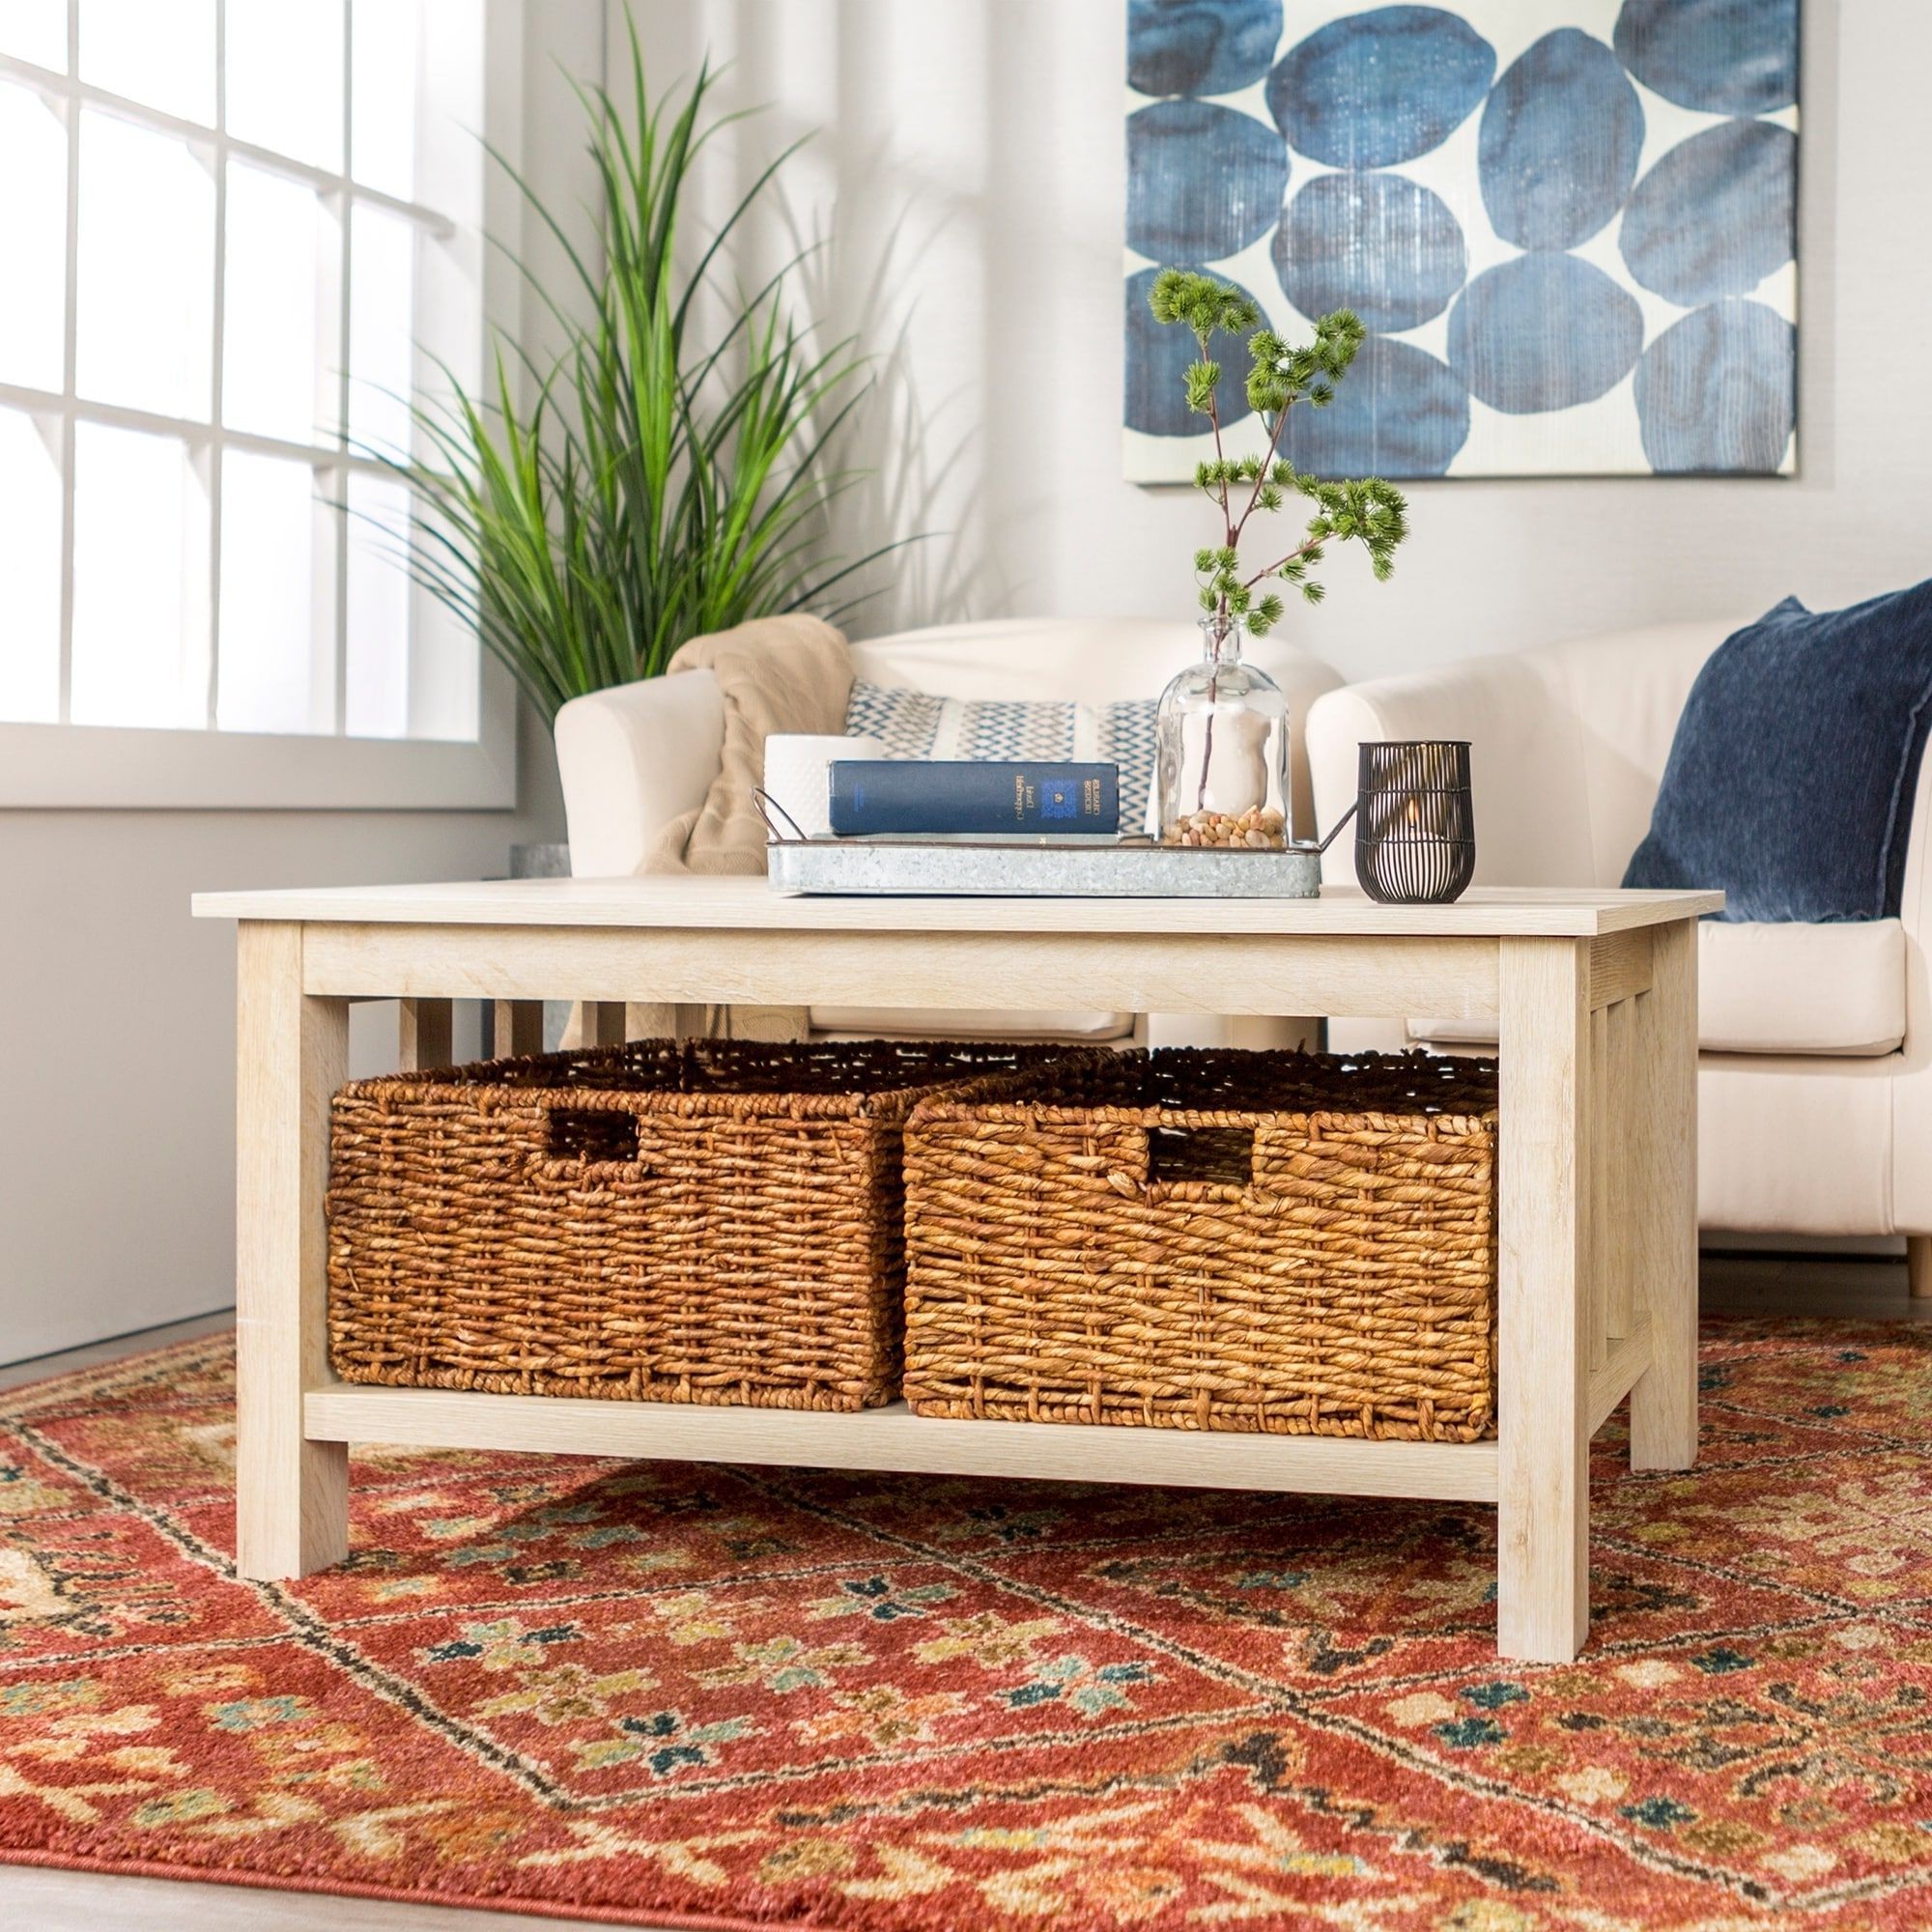 White Coffee Table With Storage Baskets / Diy Rustic Coffee Table With Intended For Latest Coffee Tables With Open Storage Shelves (View 15 of 15)